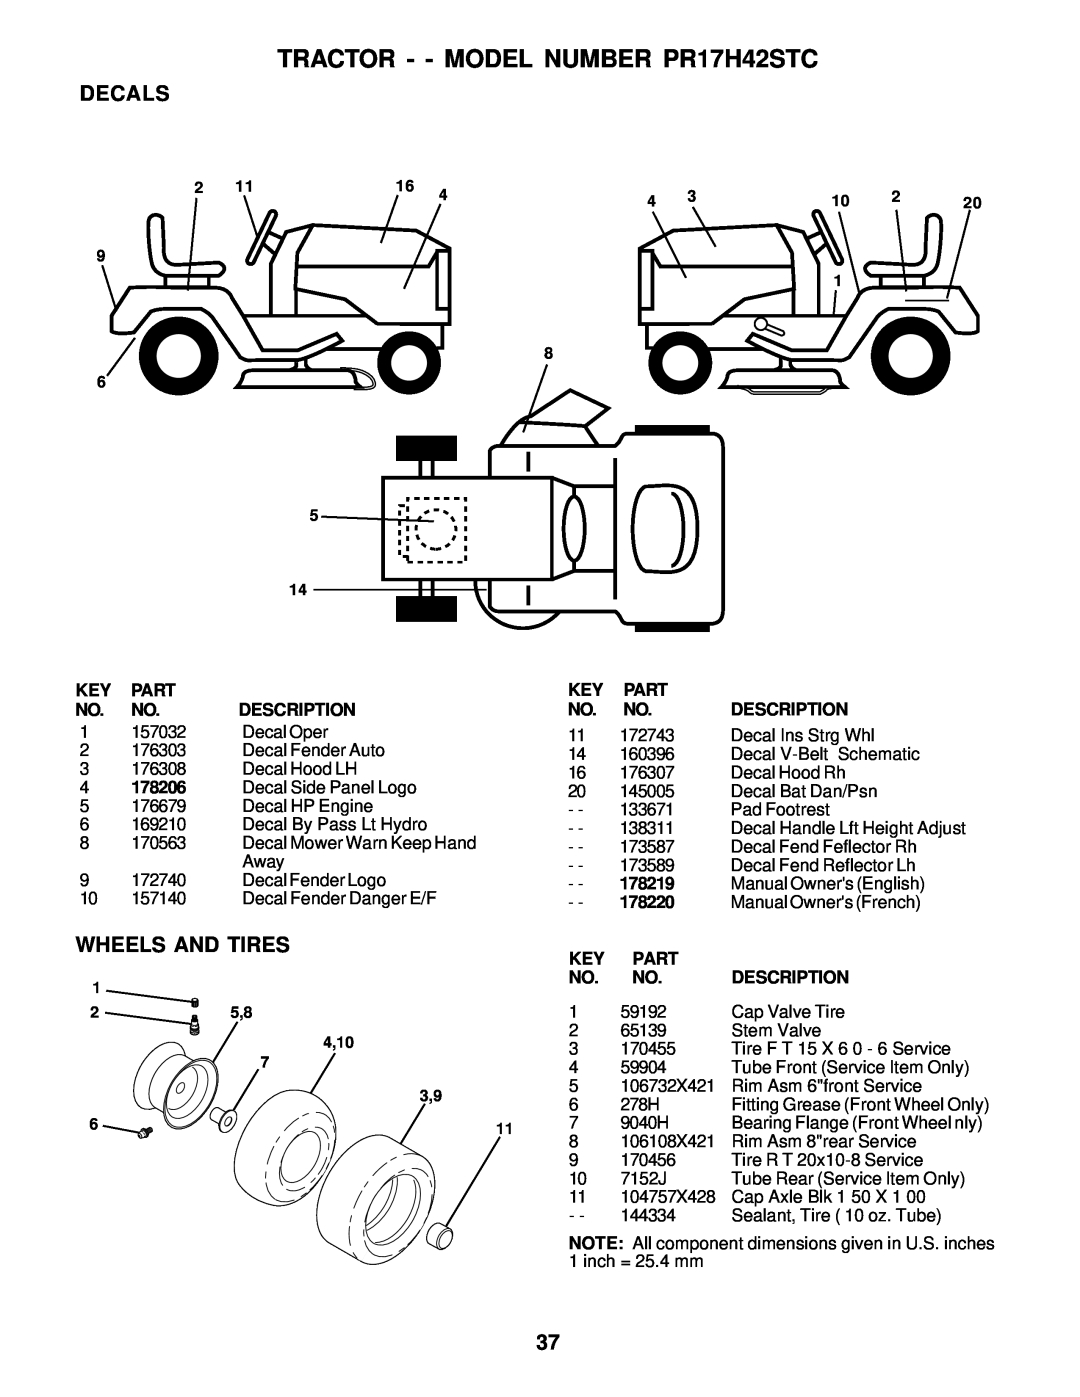 Poulan 178219 owner manual Decals, Wheels And Tires, TRACTOR - - MODEL NUMBER PR17H42STC 